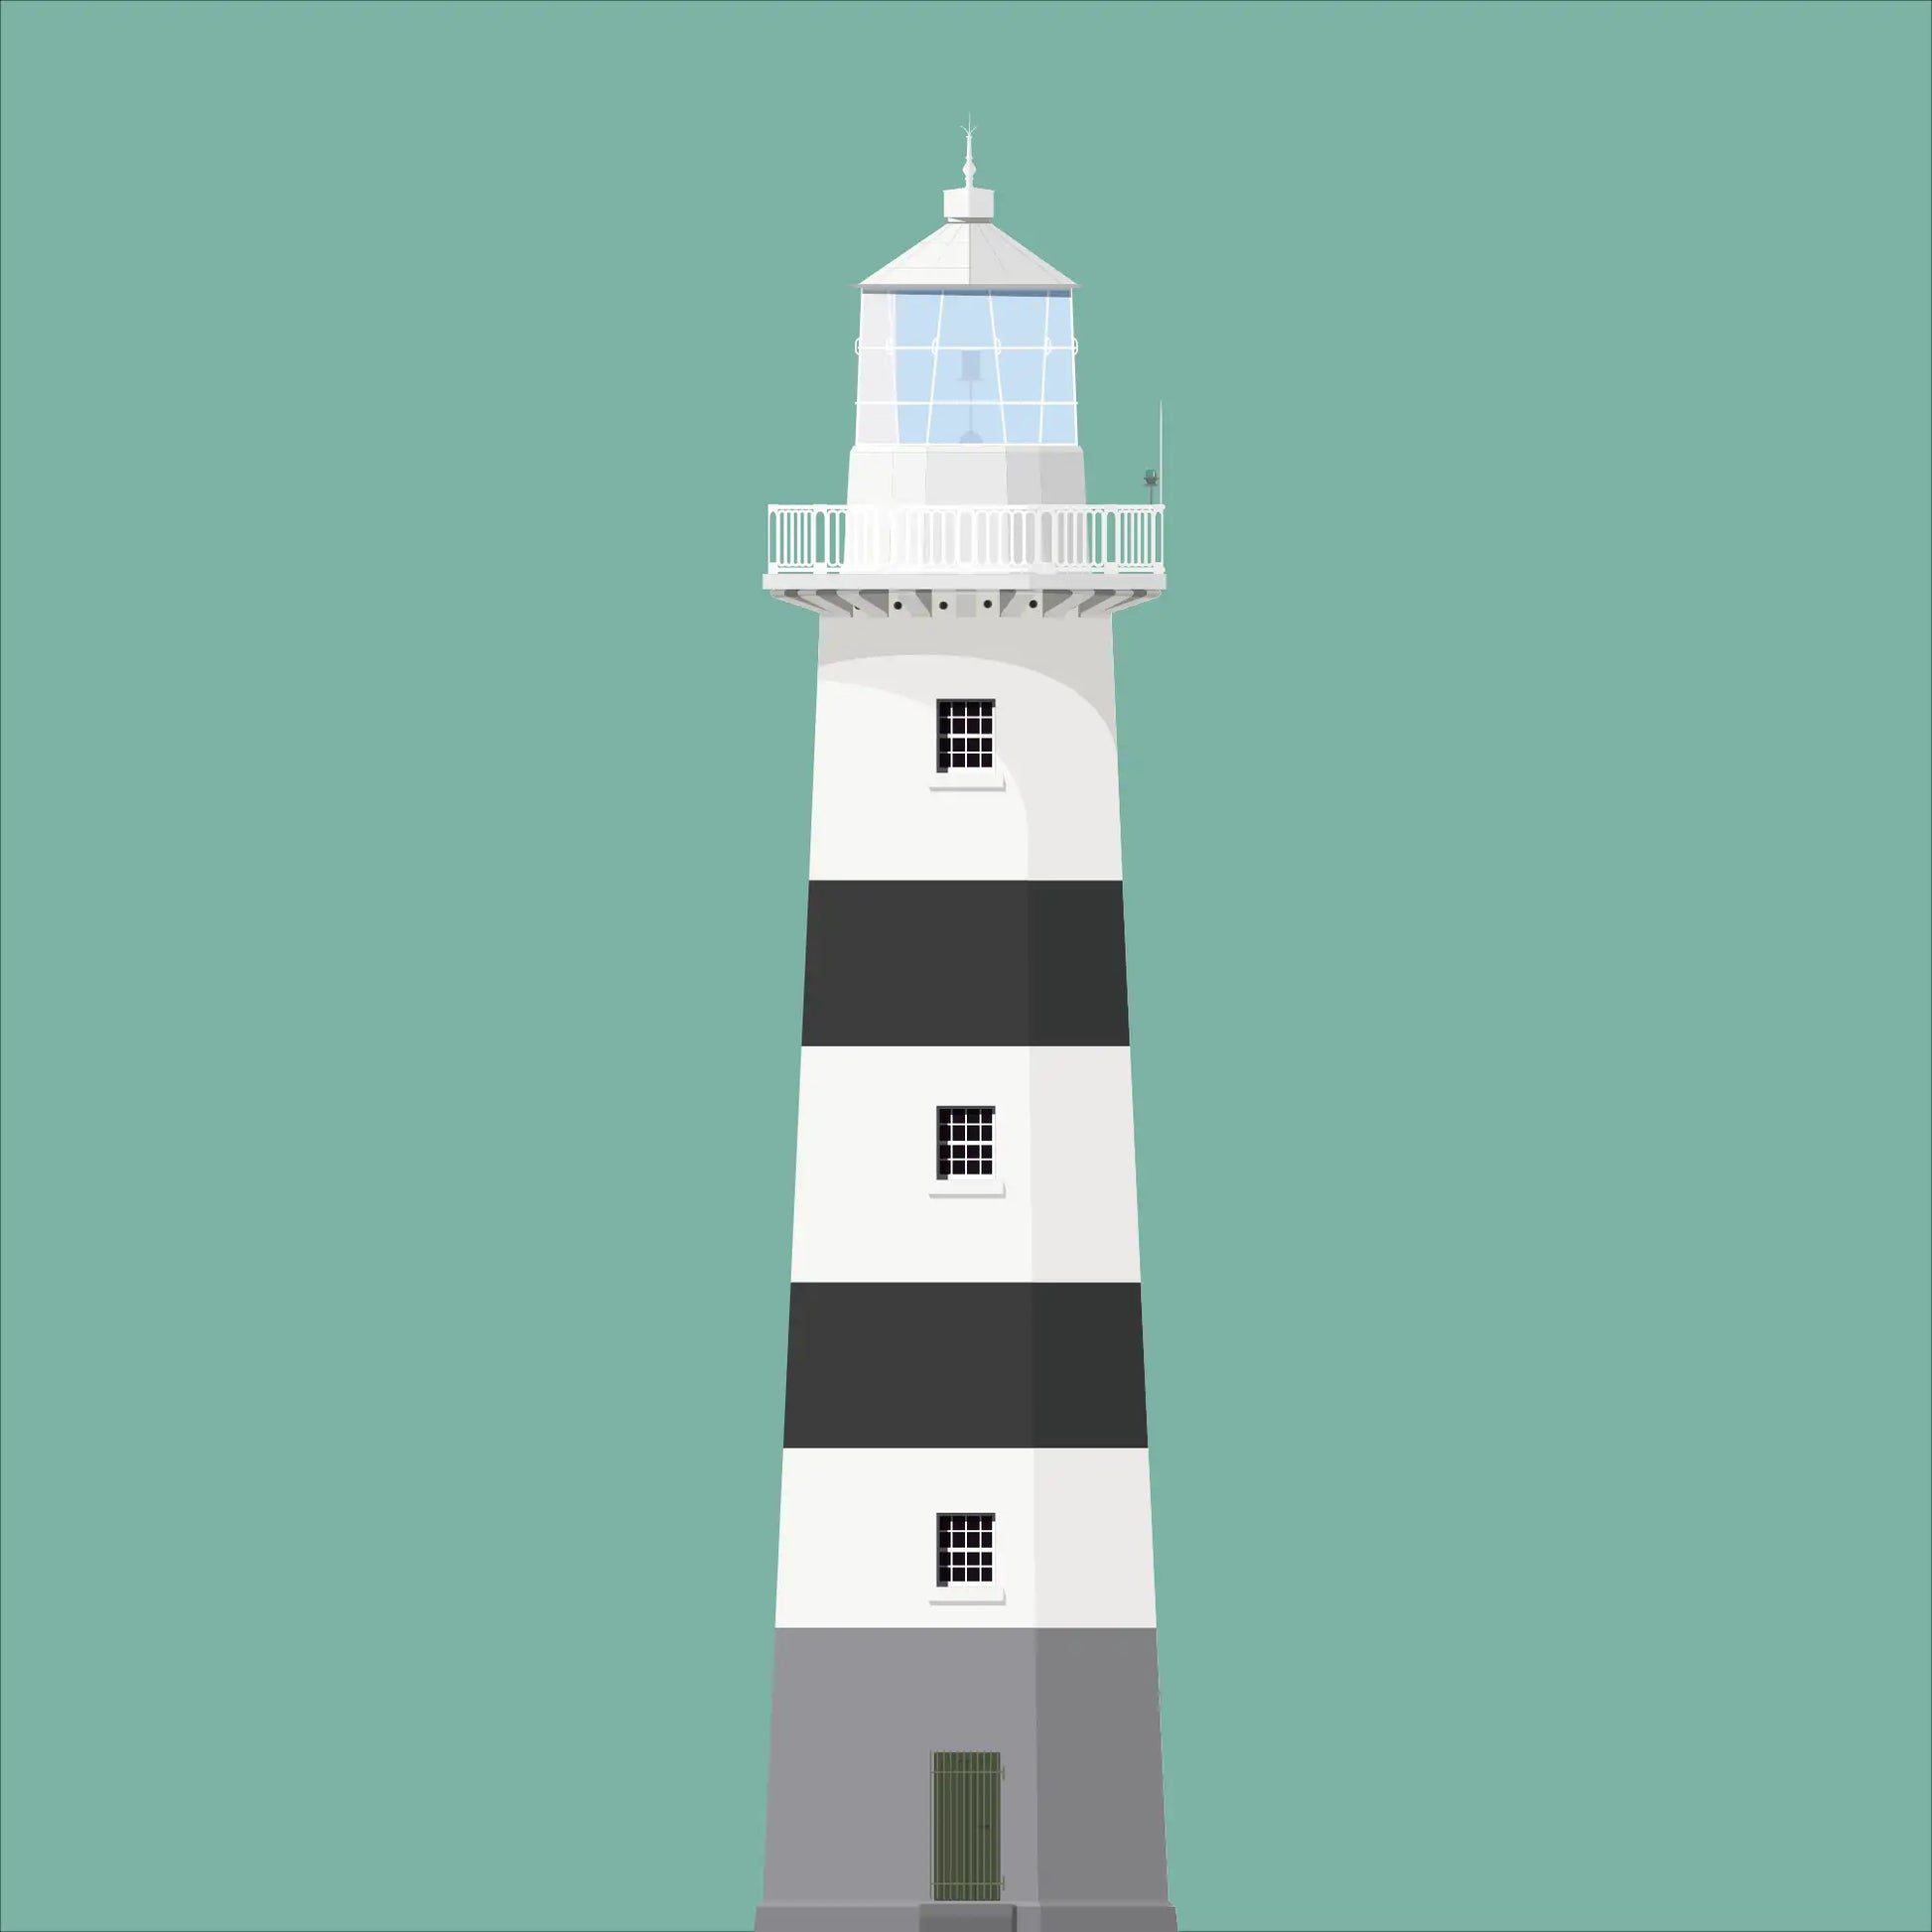 Contemporary graphic illustration of Eeragh lighthouse on a white background inside light blue square.